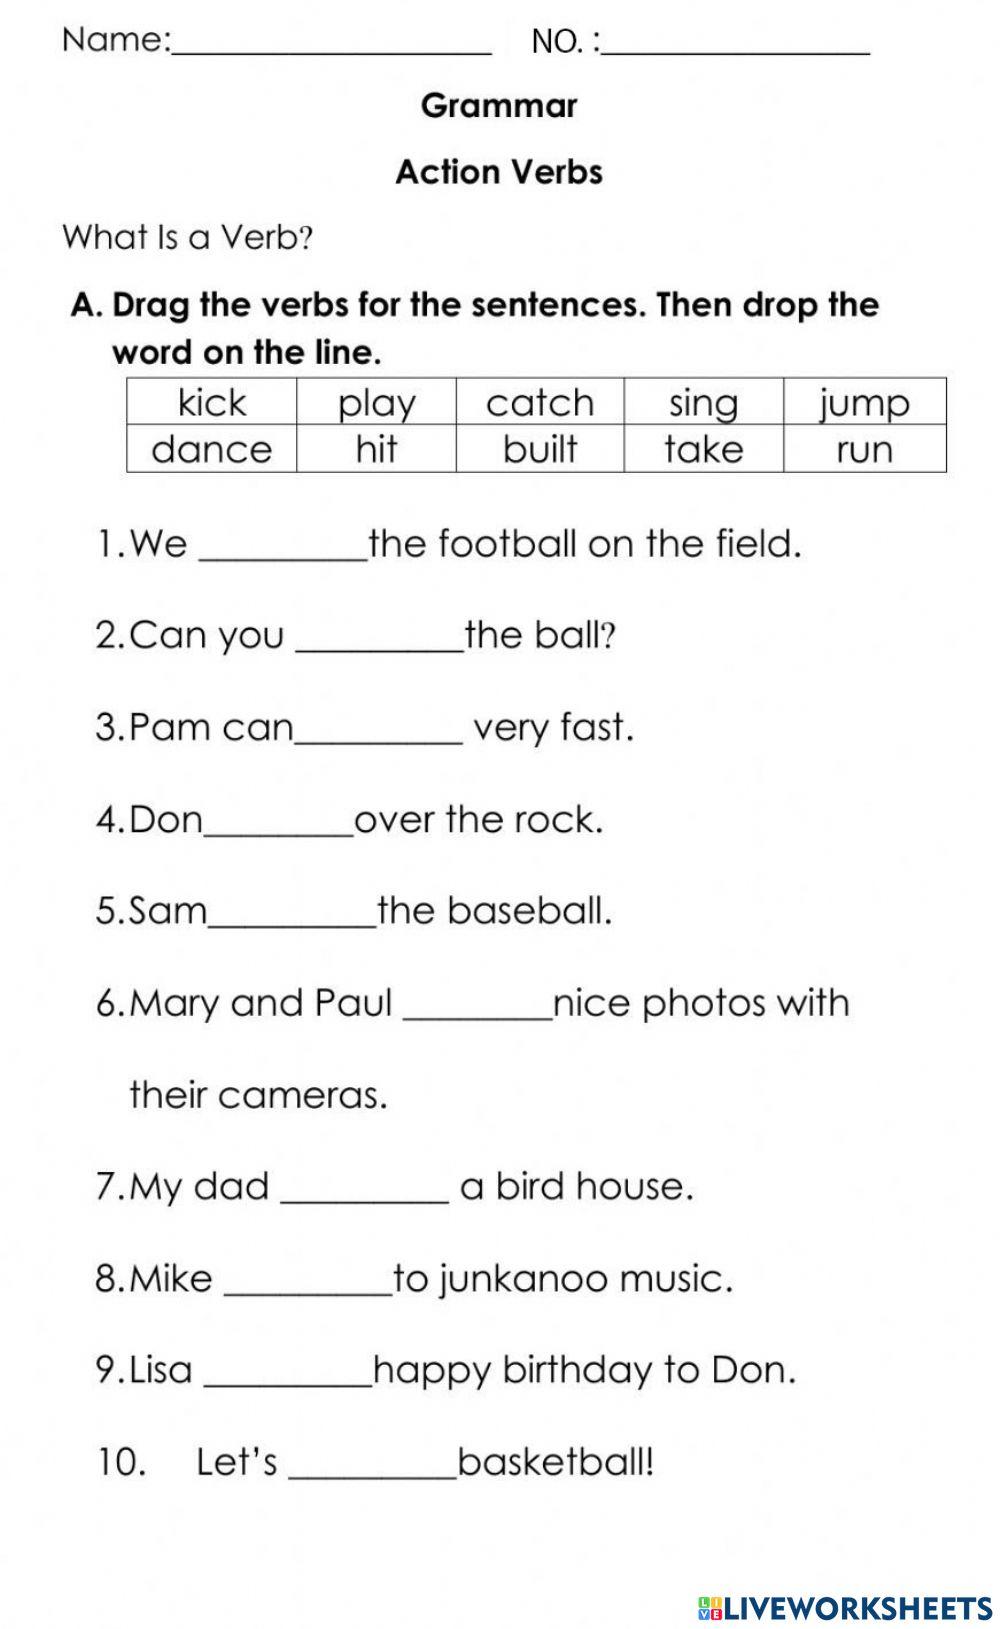 Action verbs online exercise for 3 | Live Worksheets